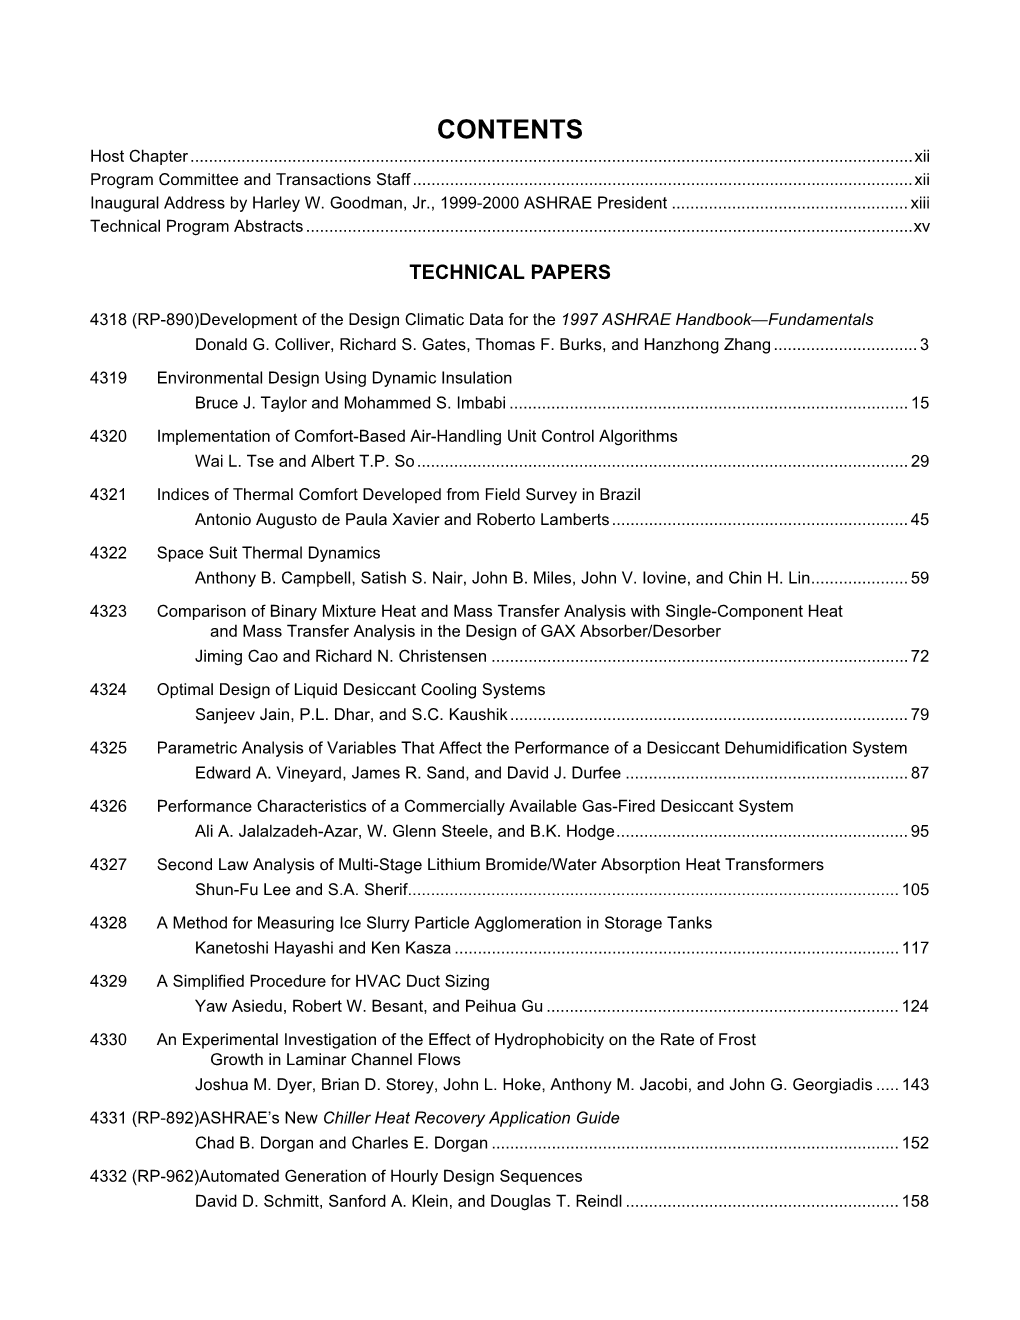 Technical Papers Table of Contents Dallas 2000